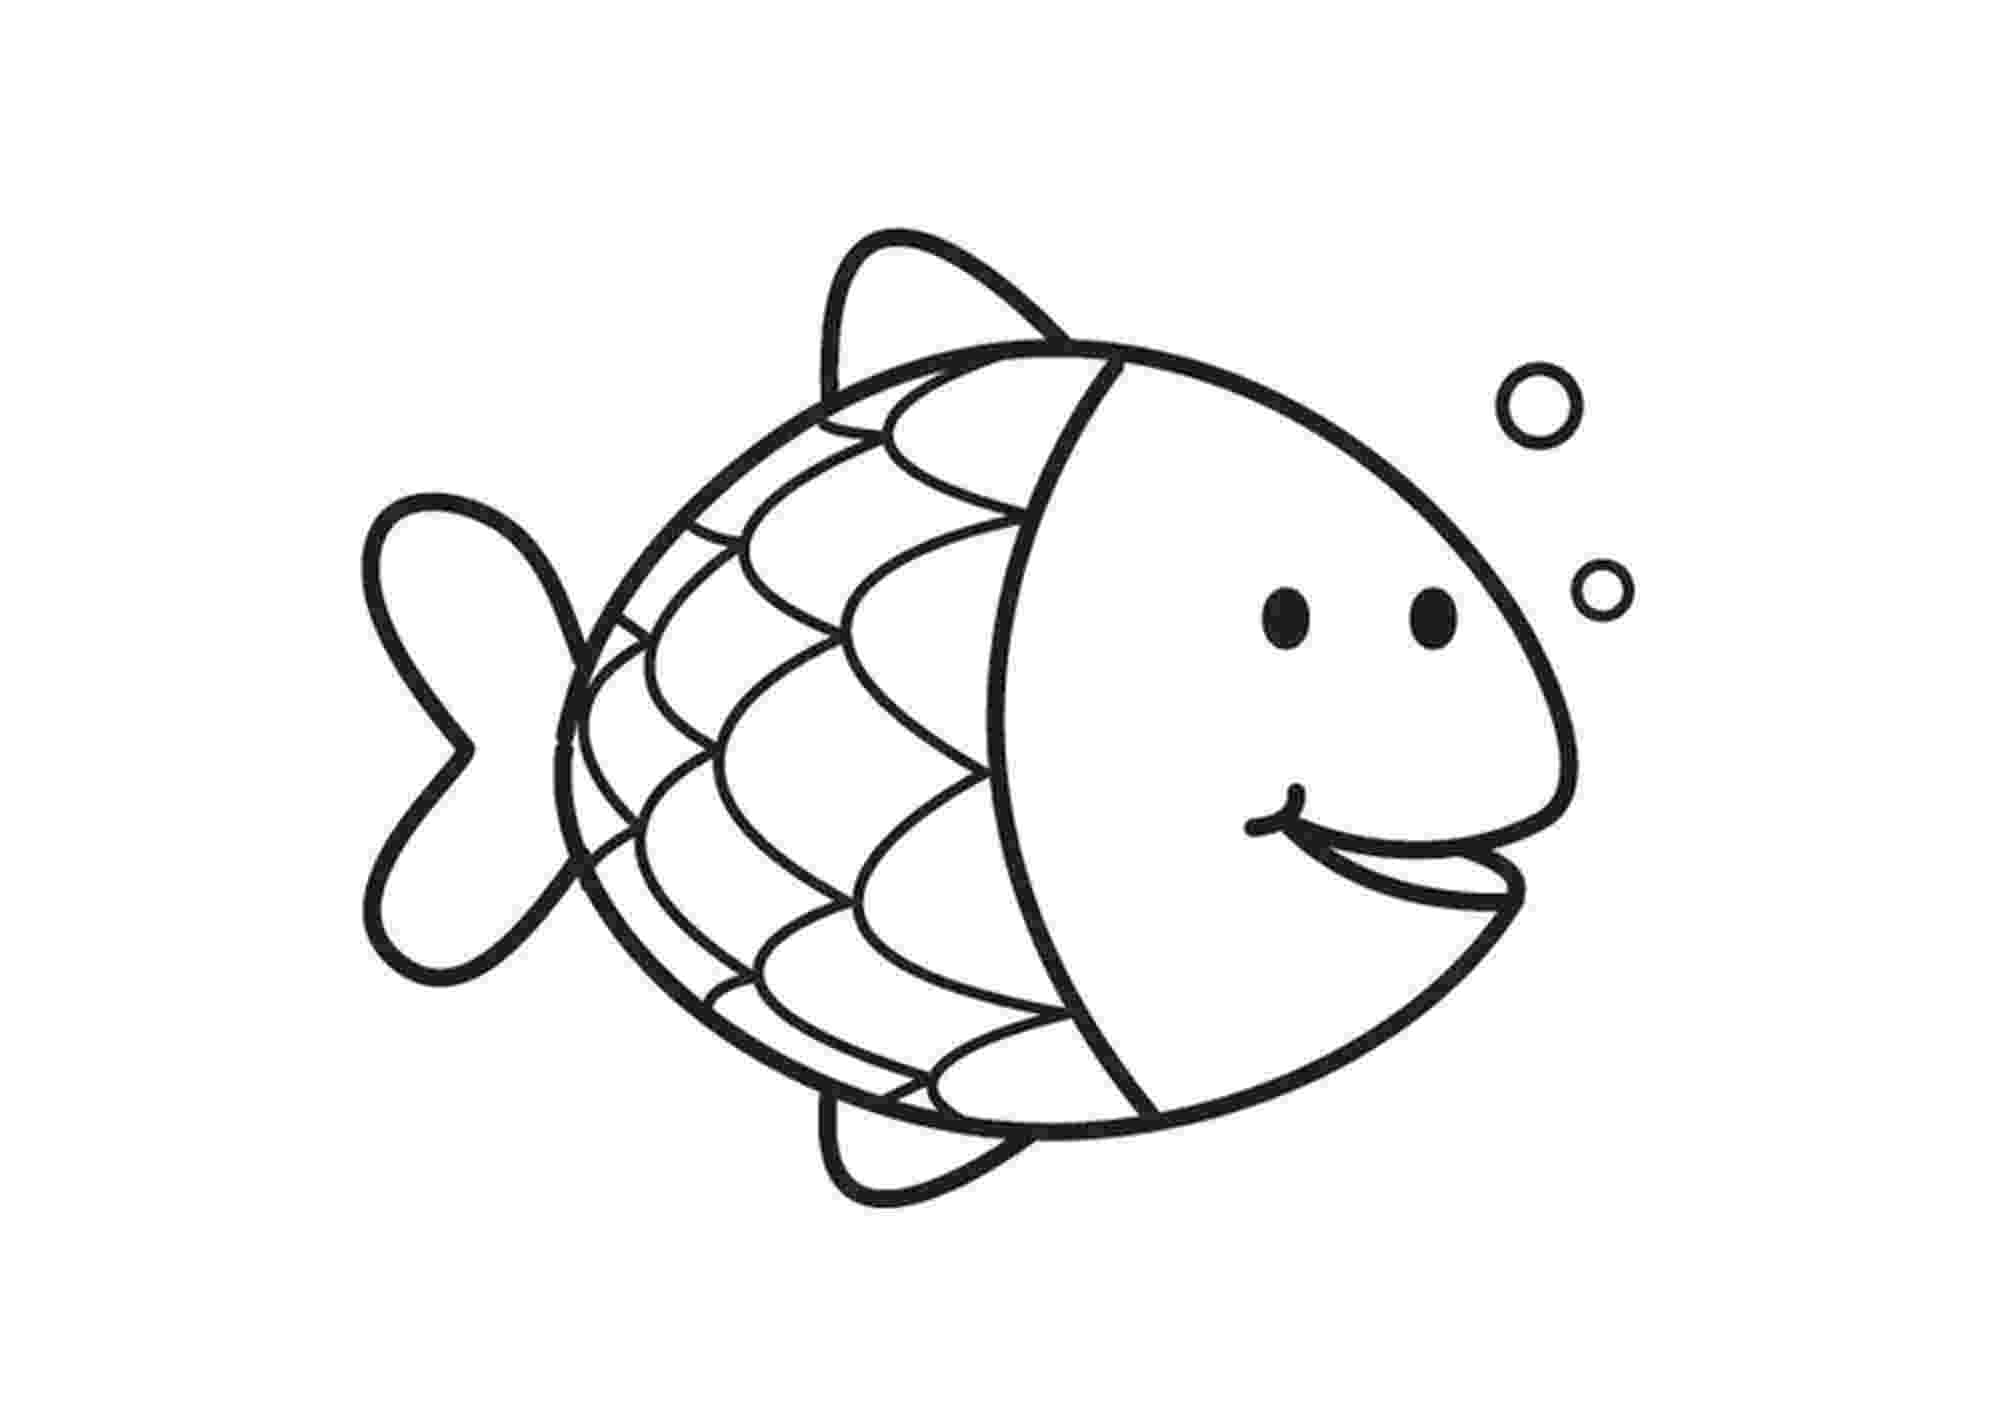 picture of fish to color fish coloring pages dr odd to fish picture color of 